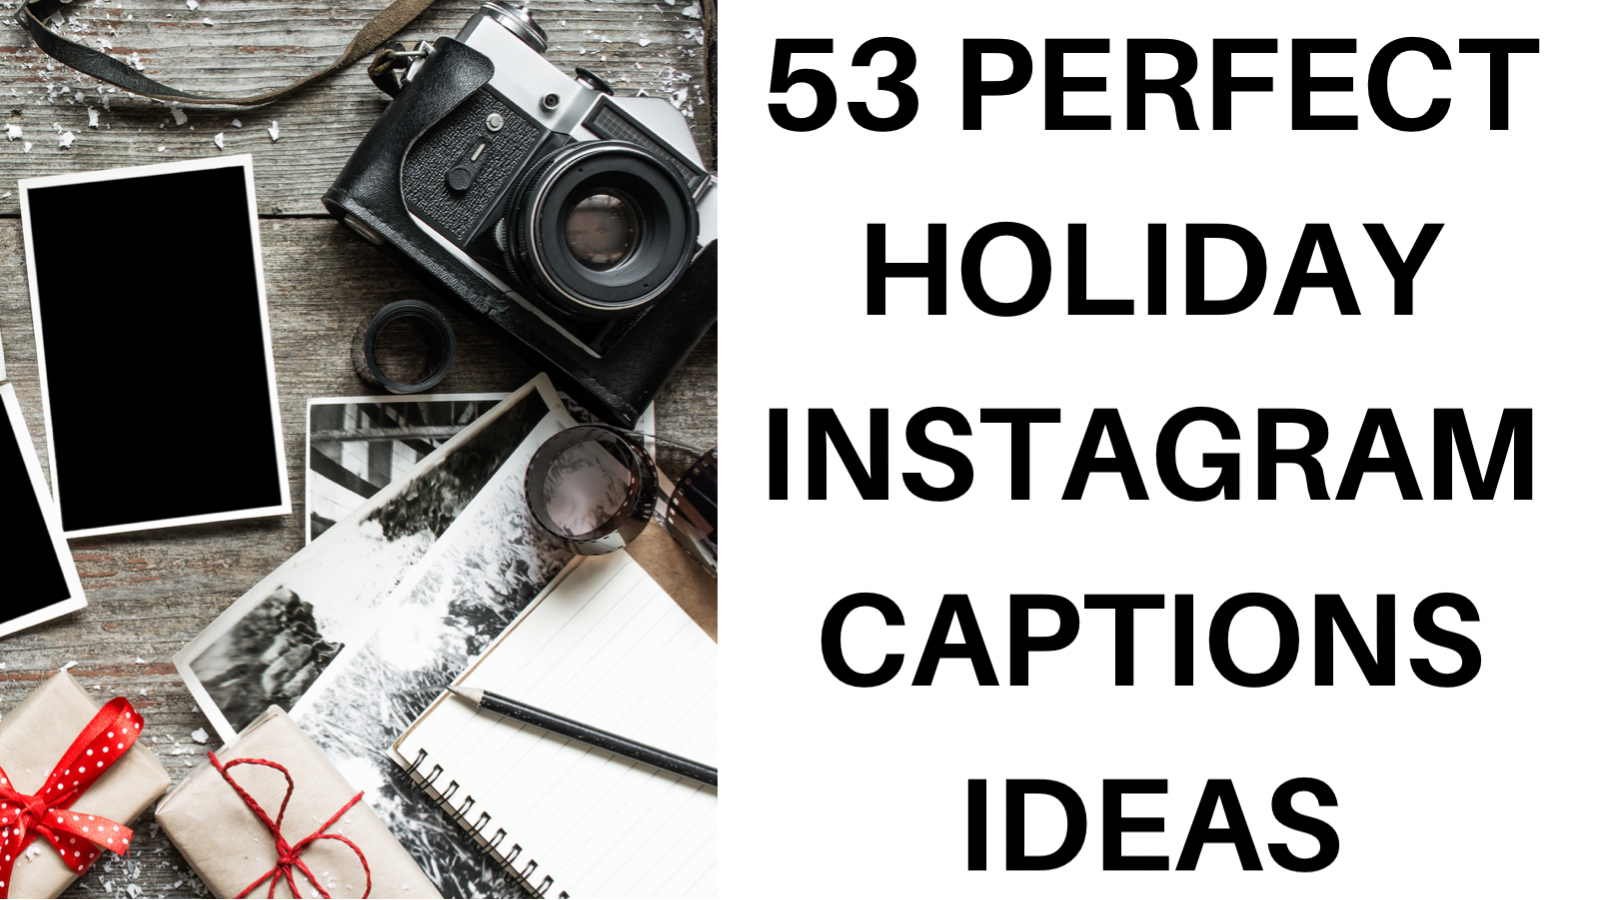 53 perfect holiday instagram captions ideas!